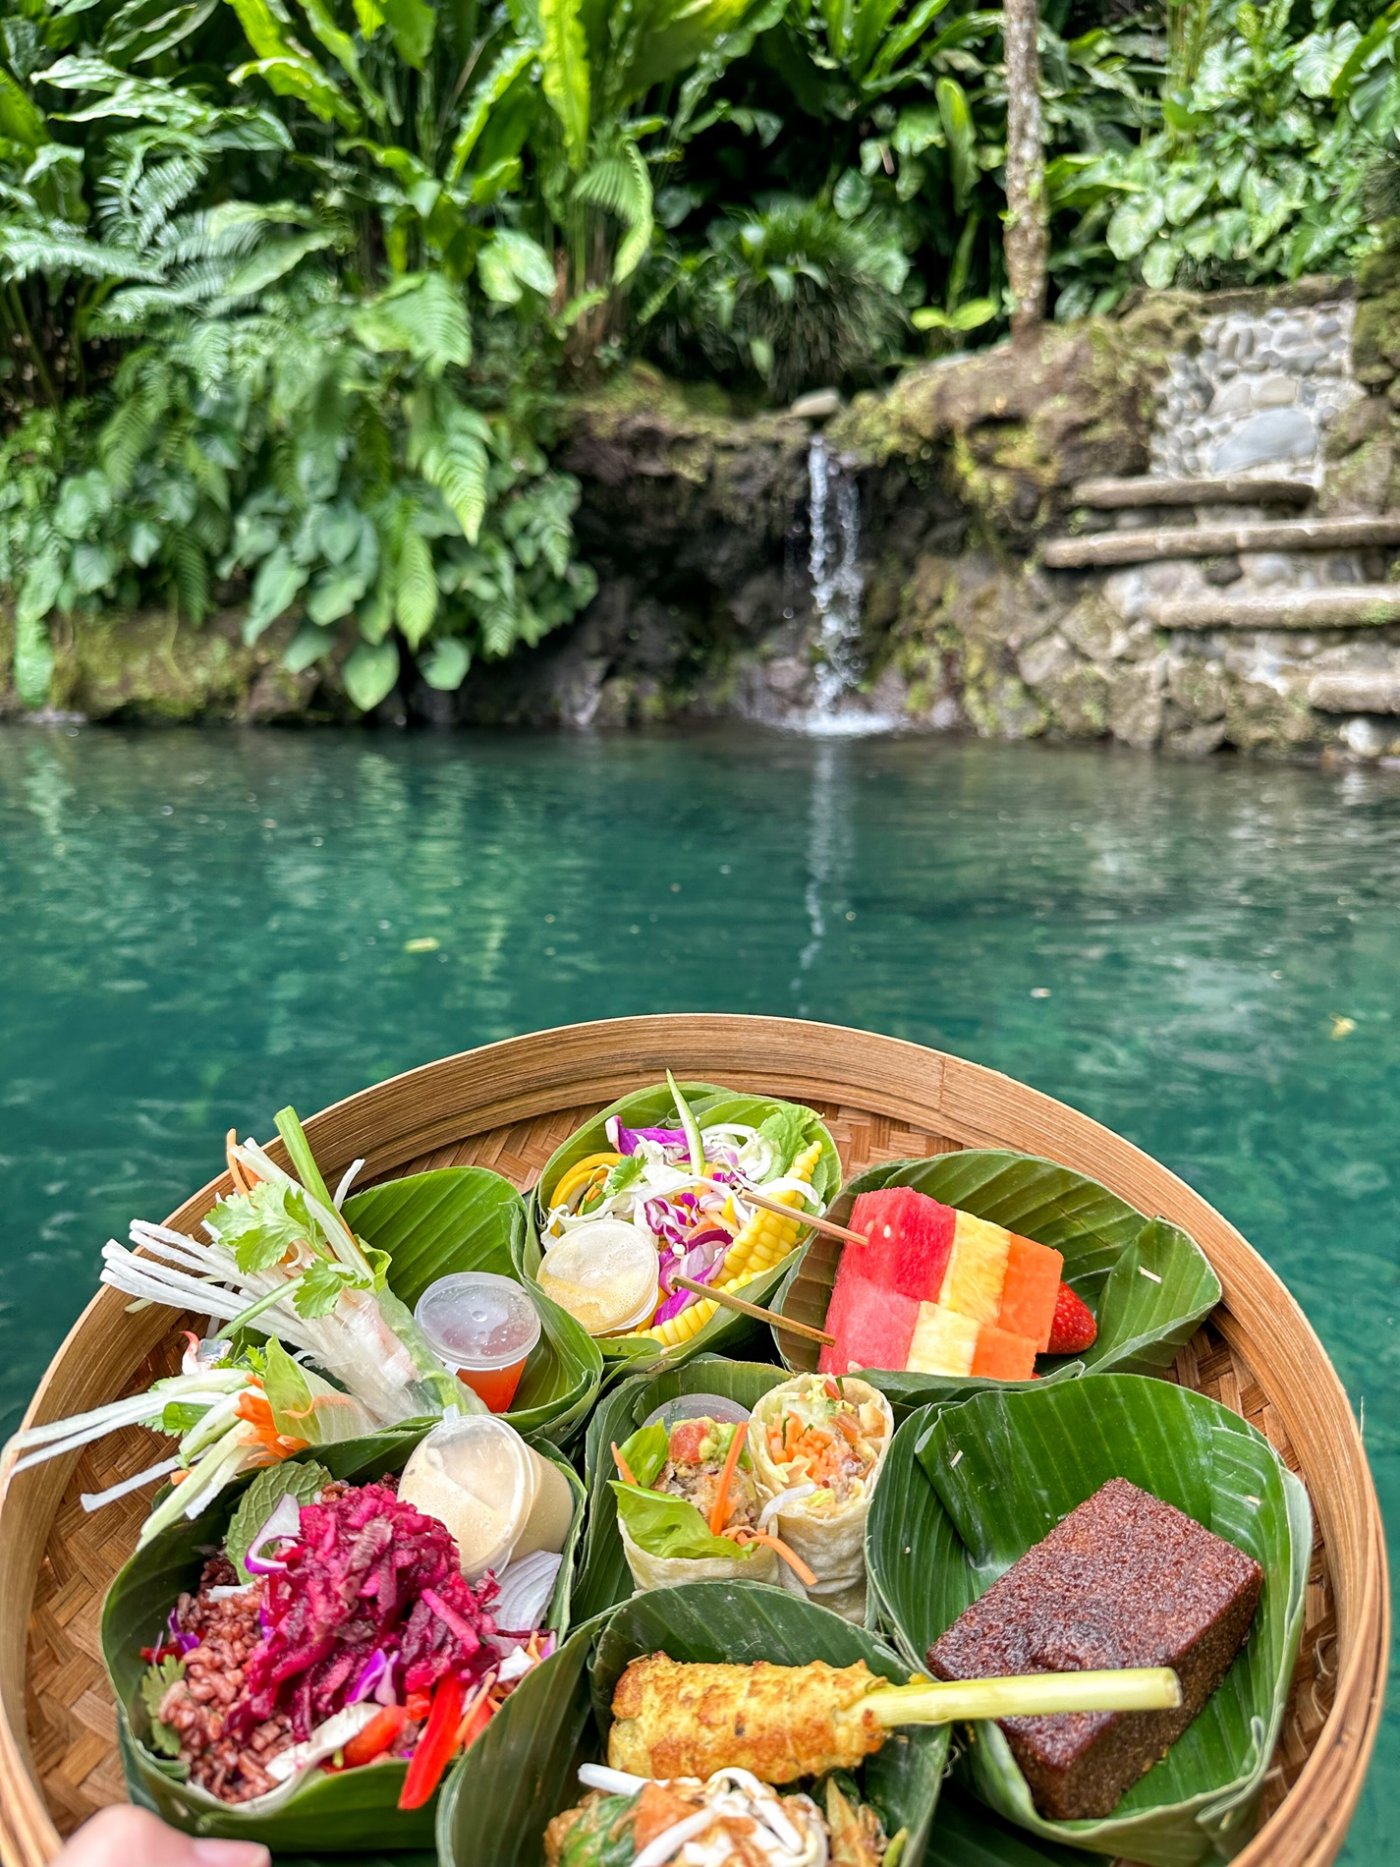 Traditional Picnic-Style Lunch at Kedara Water Garden